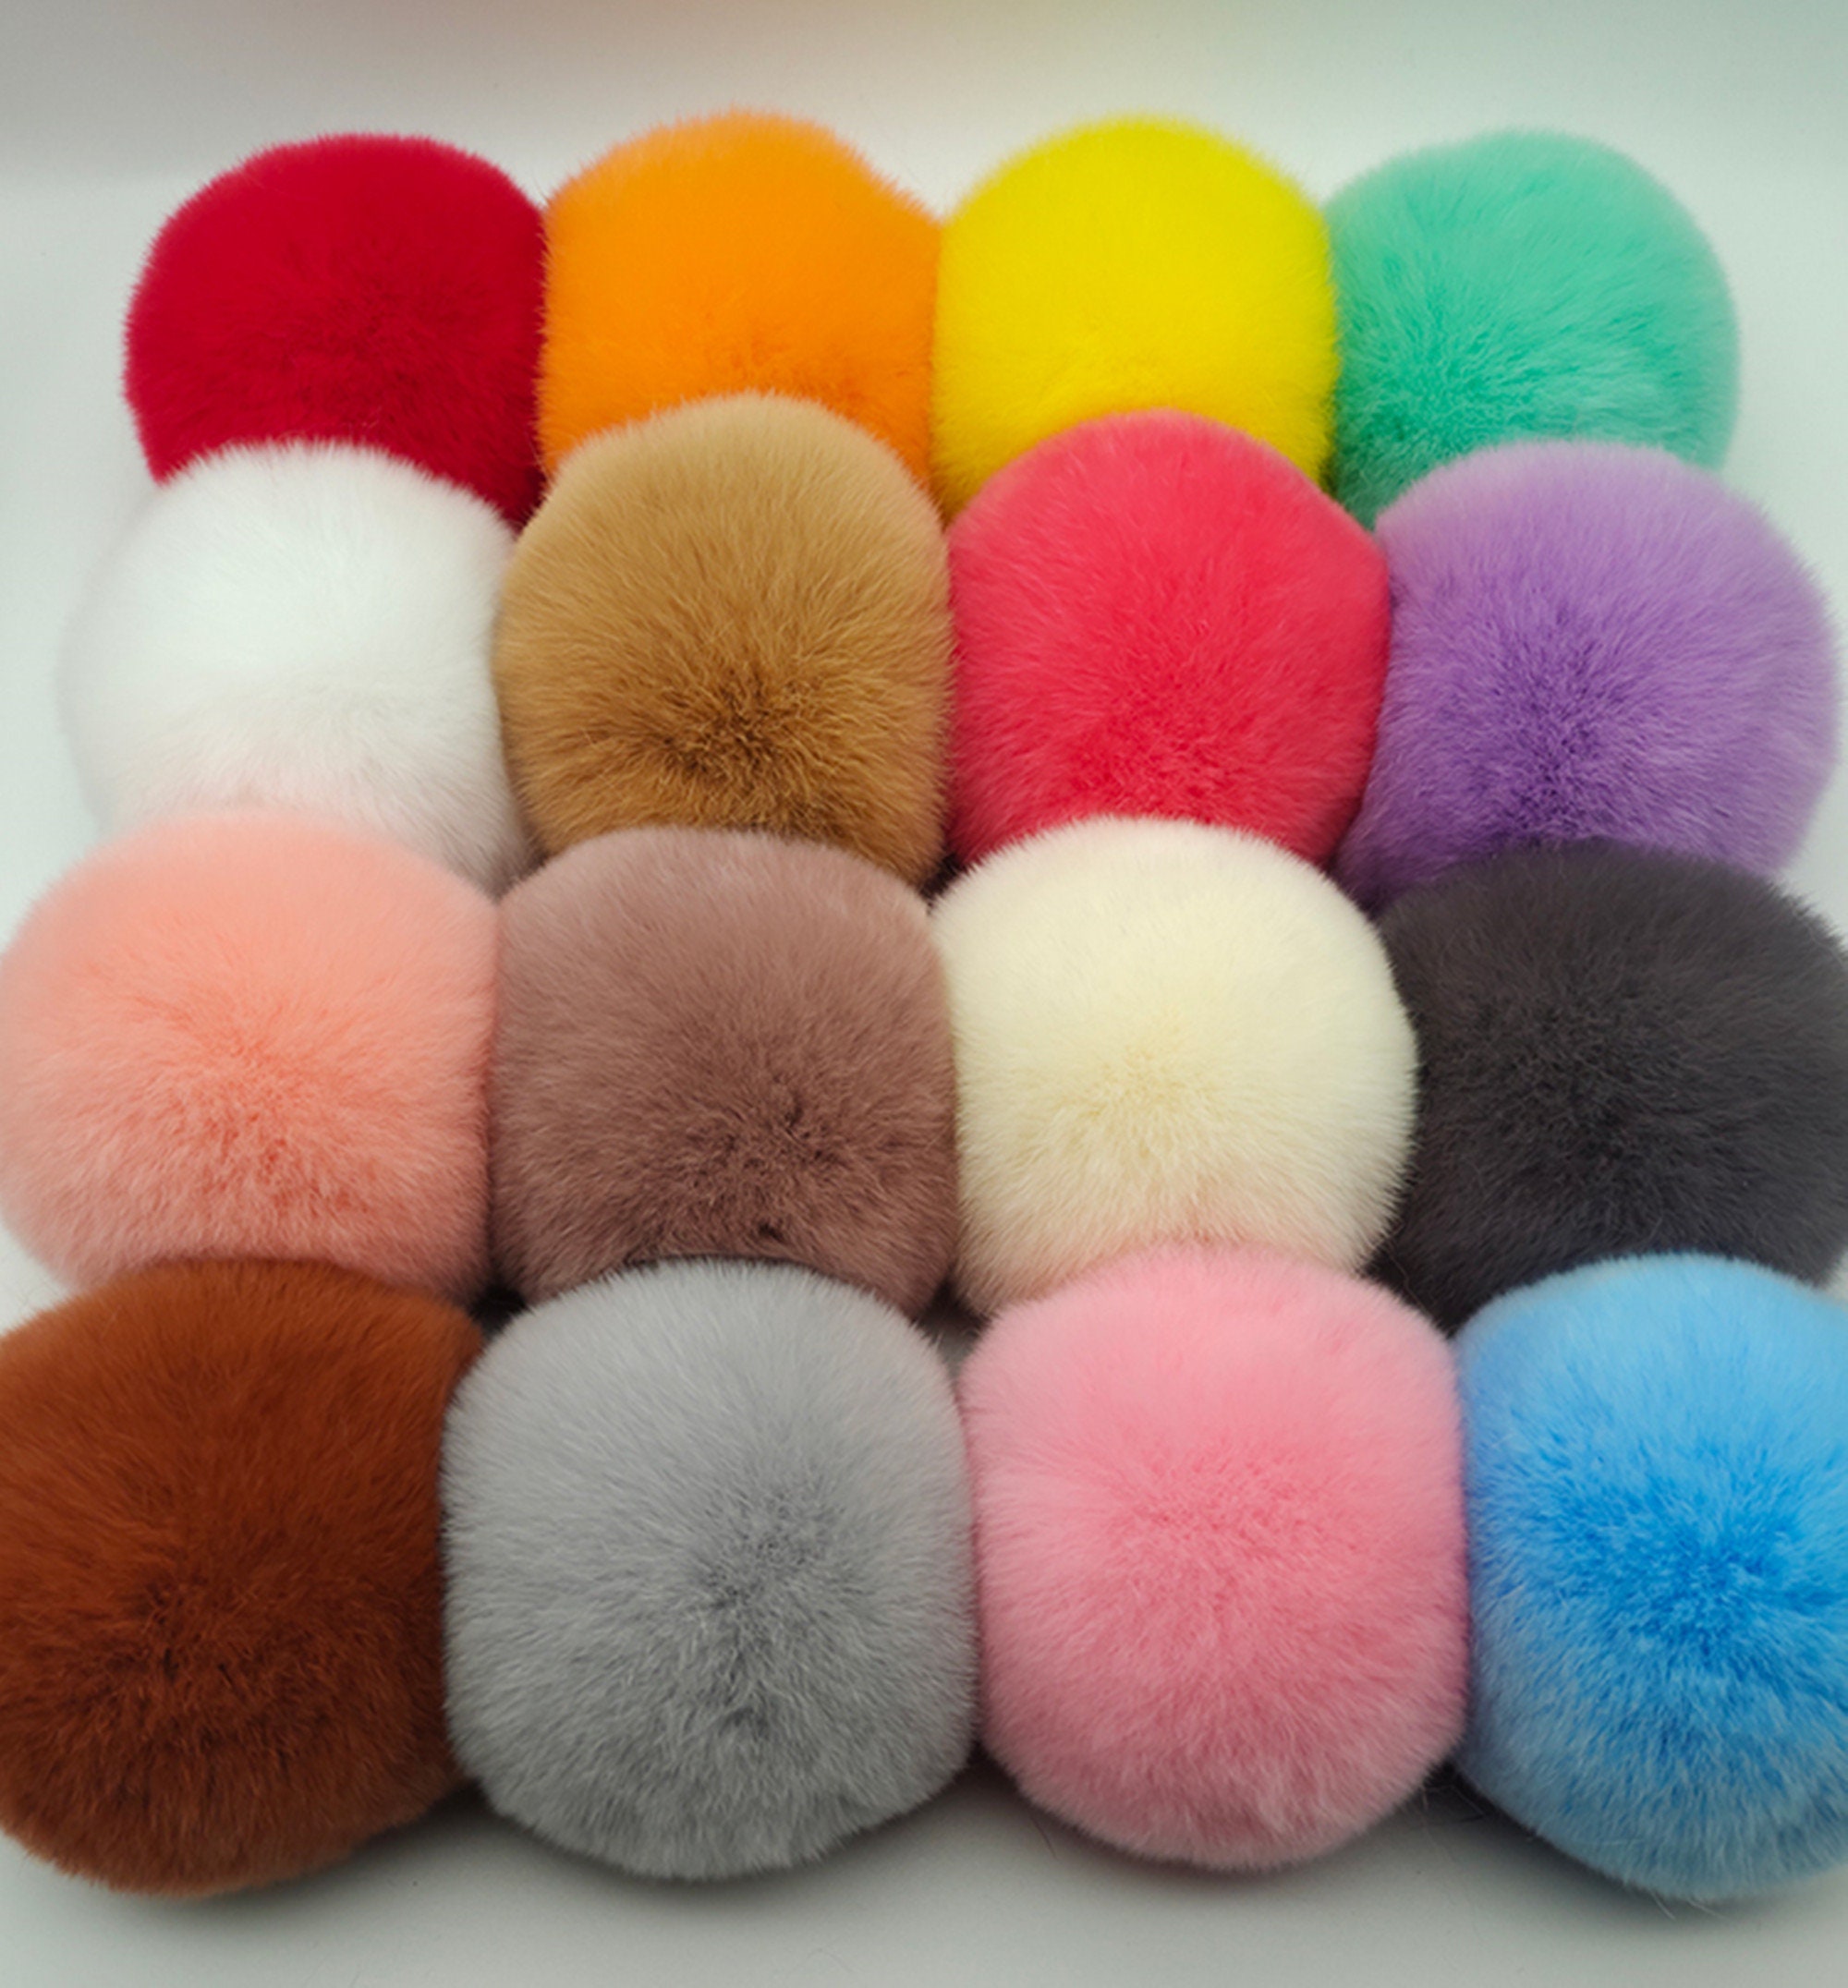 13mm Glitter Pom Poms Mixed Colour Art Craft Card Making 100 Pieces 